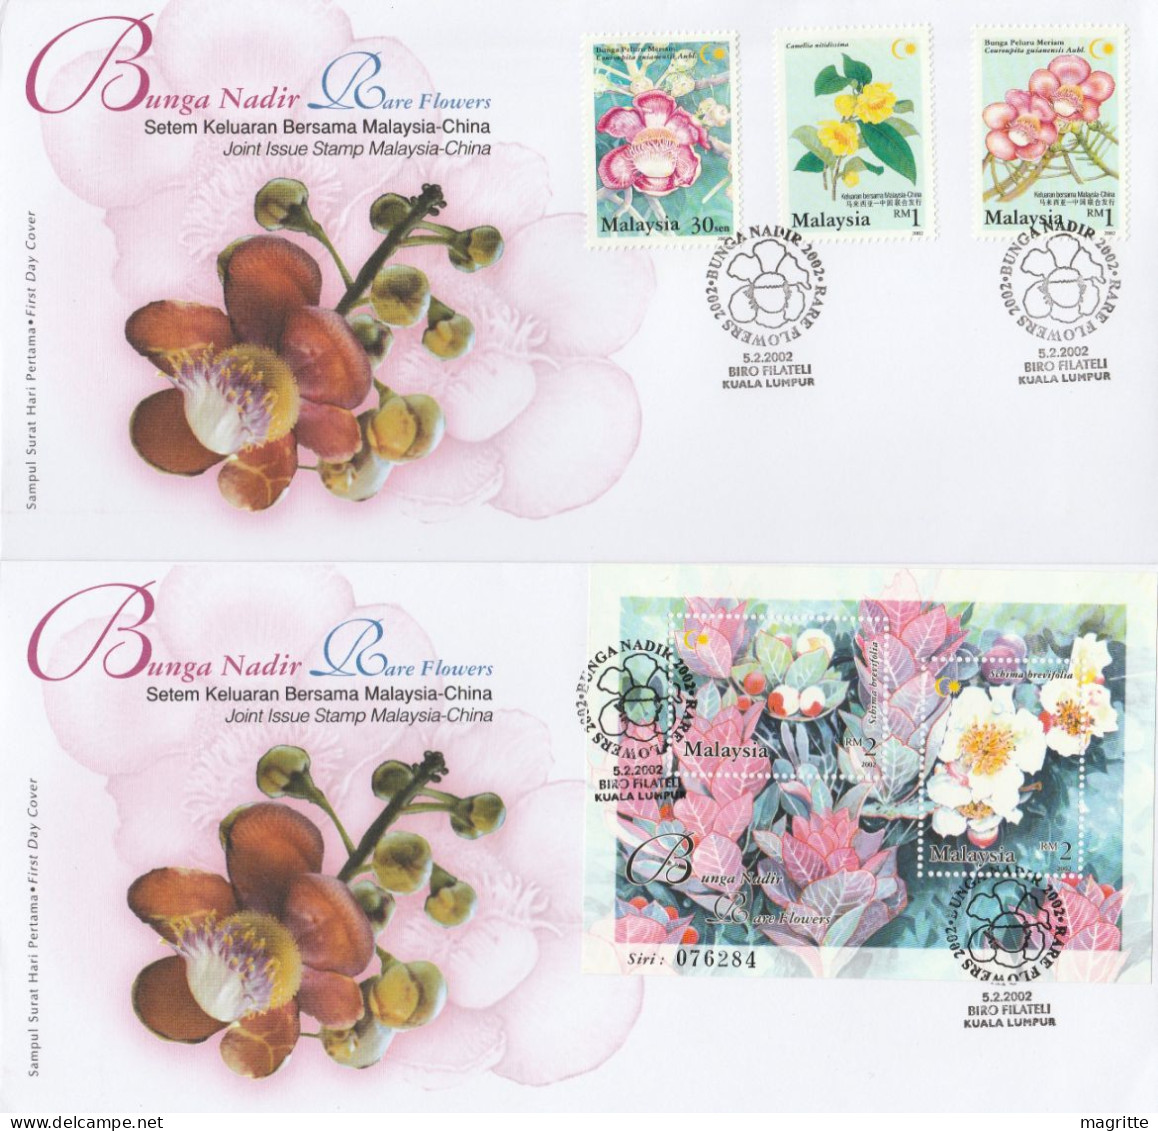 Malaisie 2002 FDC 's Emission Commune Chine Fleurs Malaysia Rare Flowers Joint Issue China FDC's - Emissions Communes